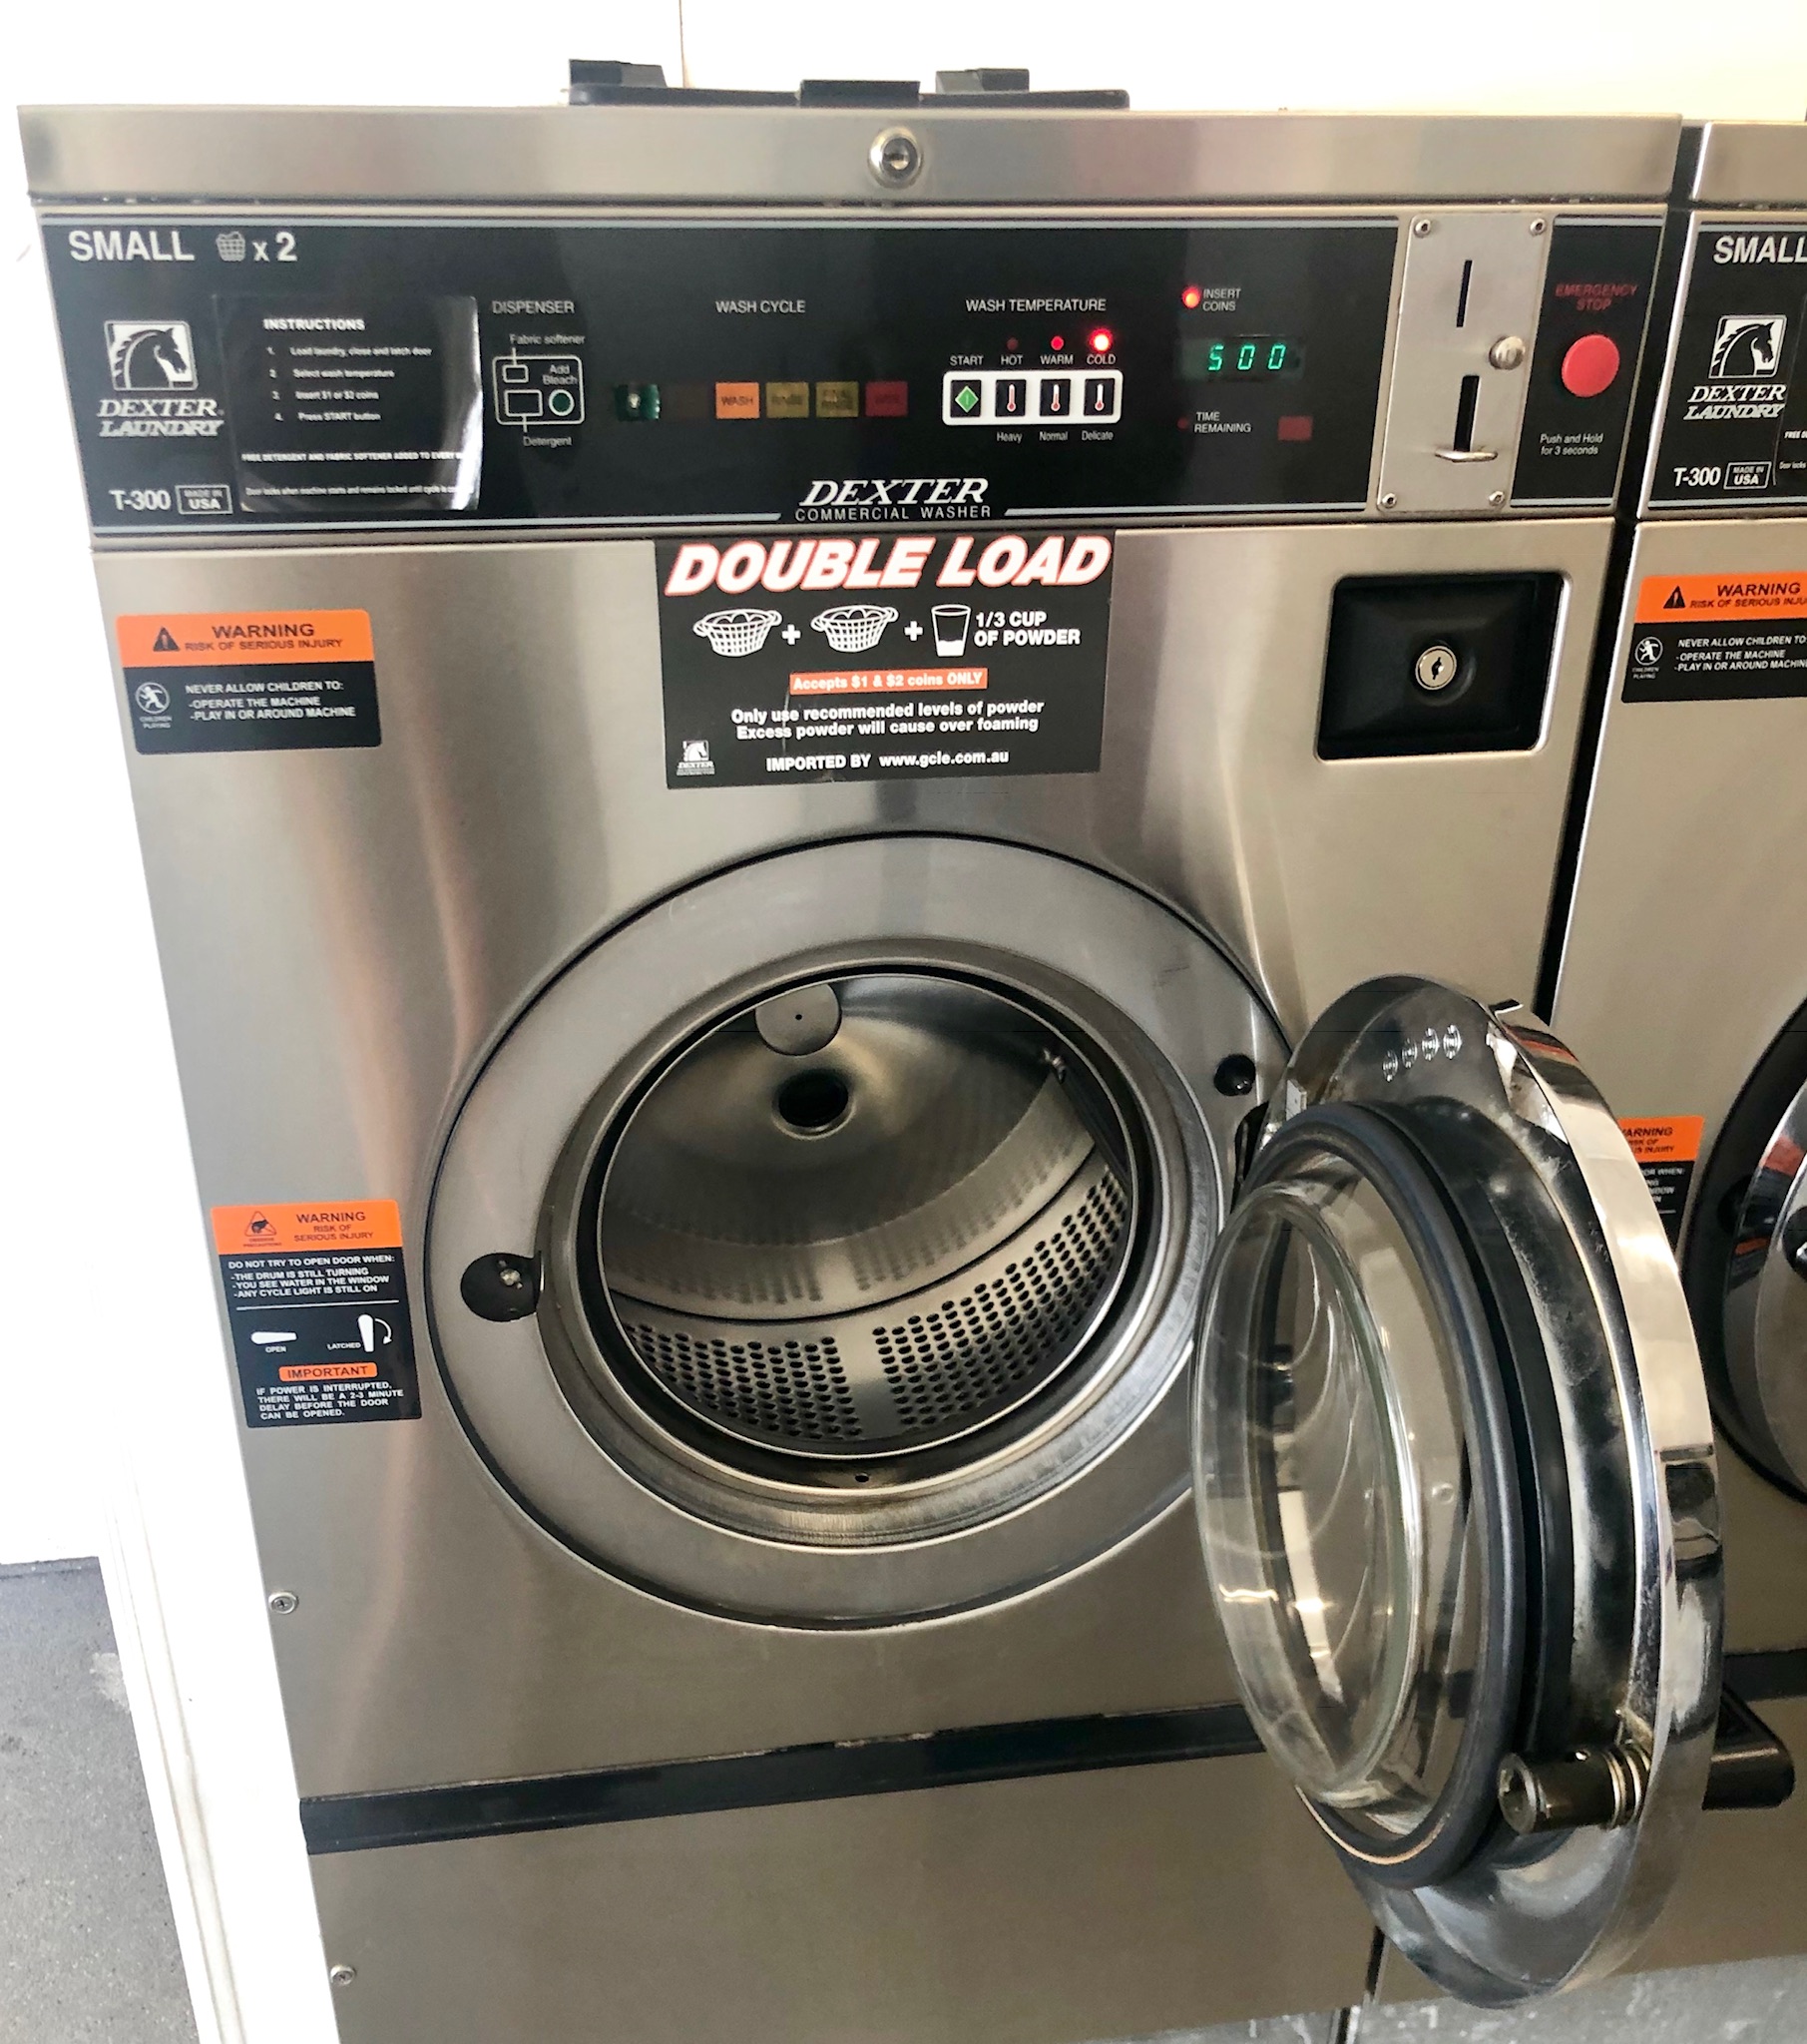 Kingston Road Coin Laundry Washer and Dryers